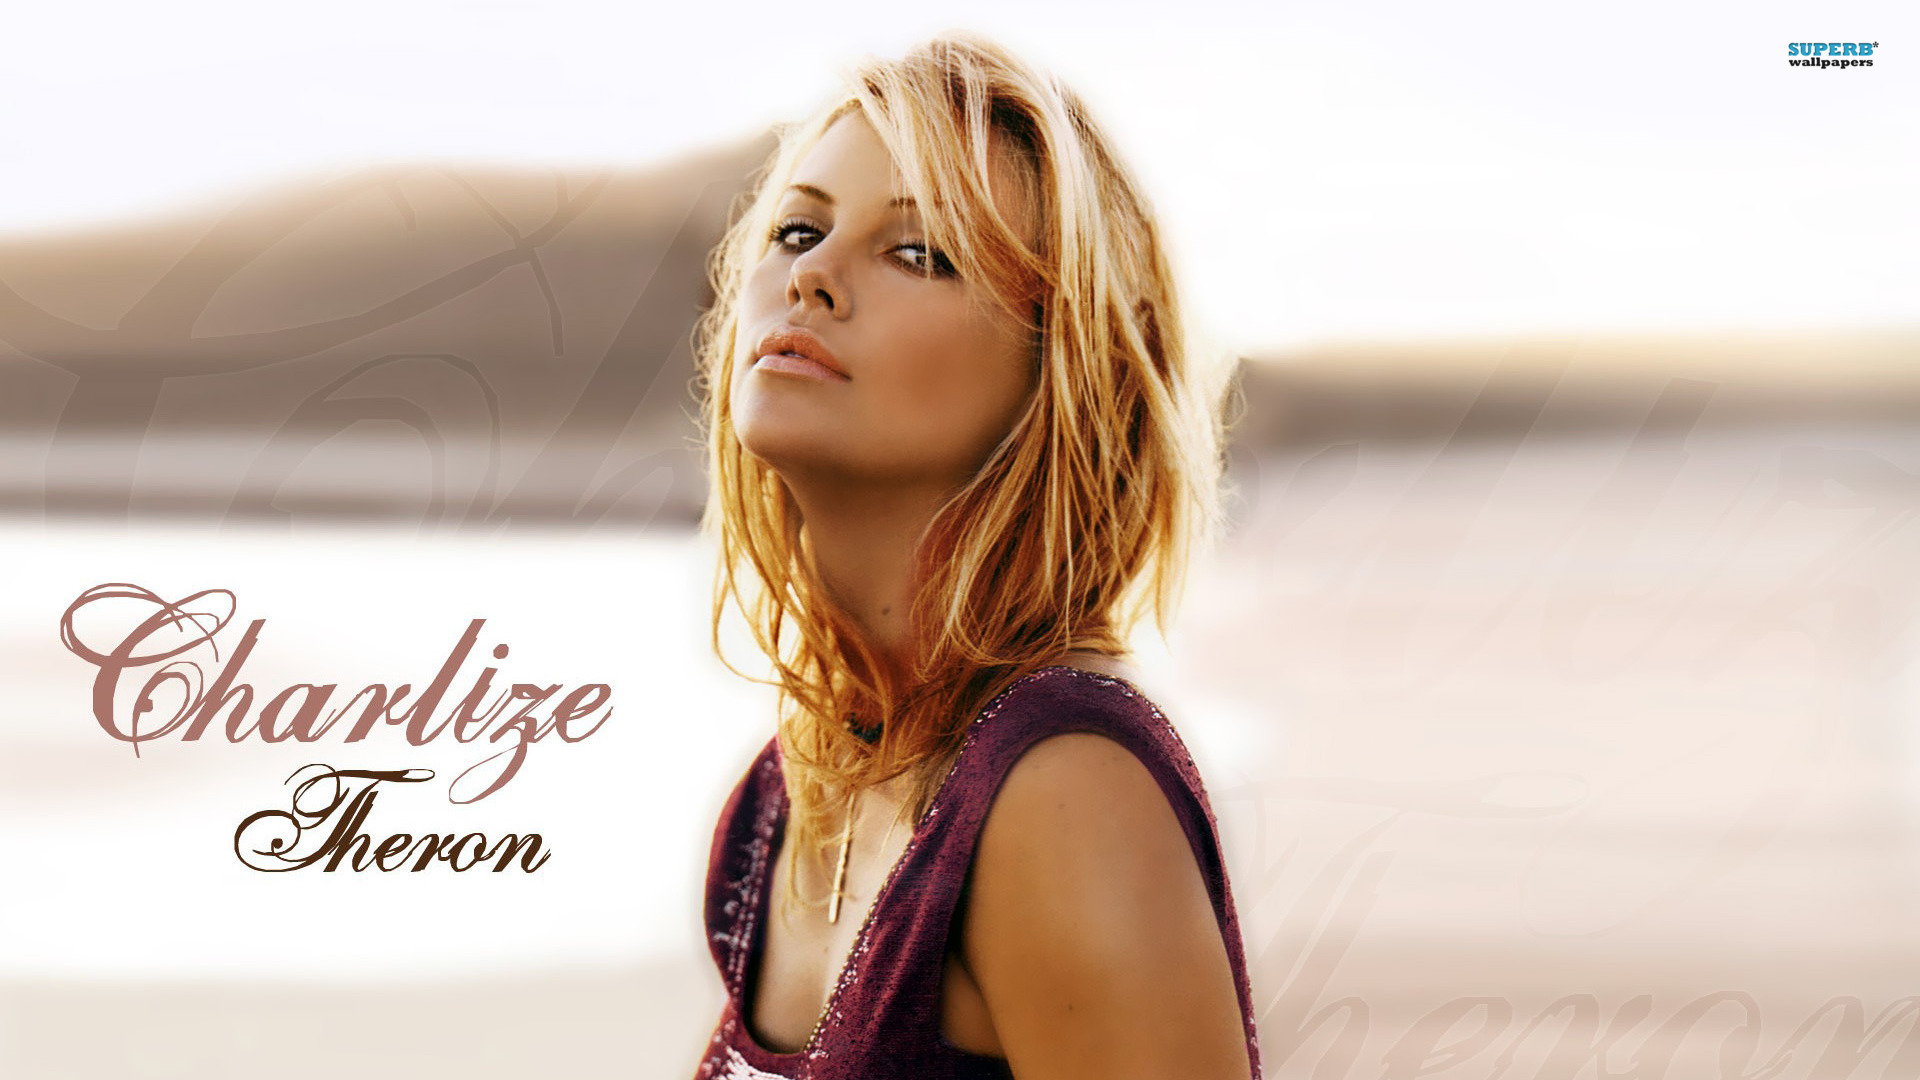 Charlize Theron Wallpapers High Resolution and Quality